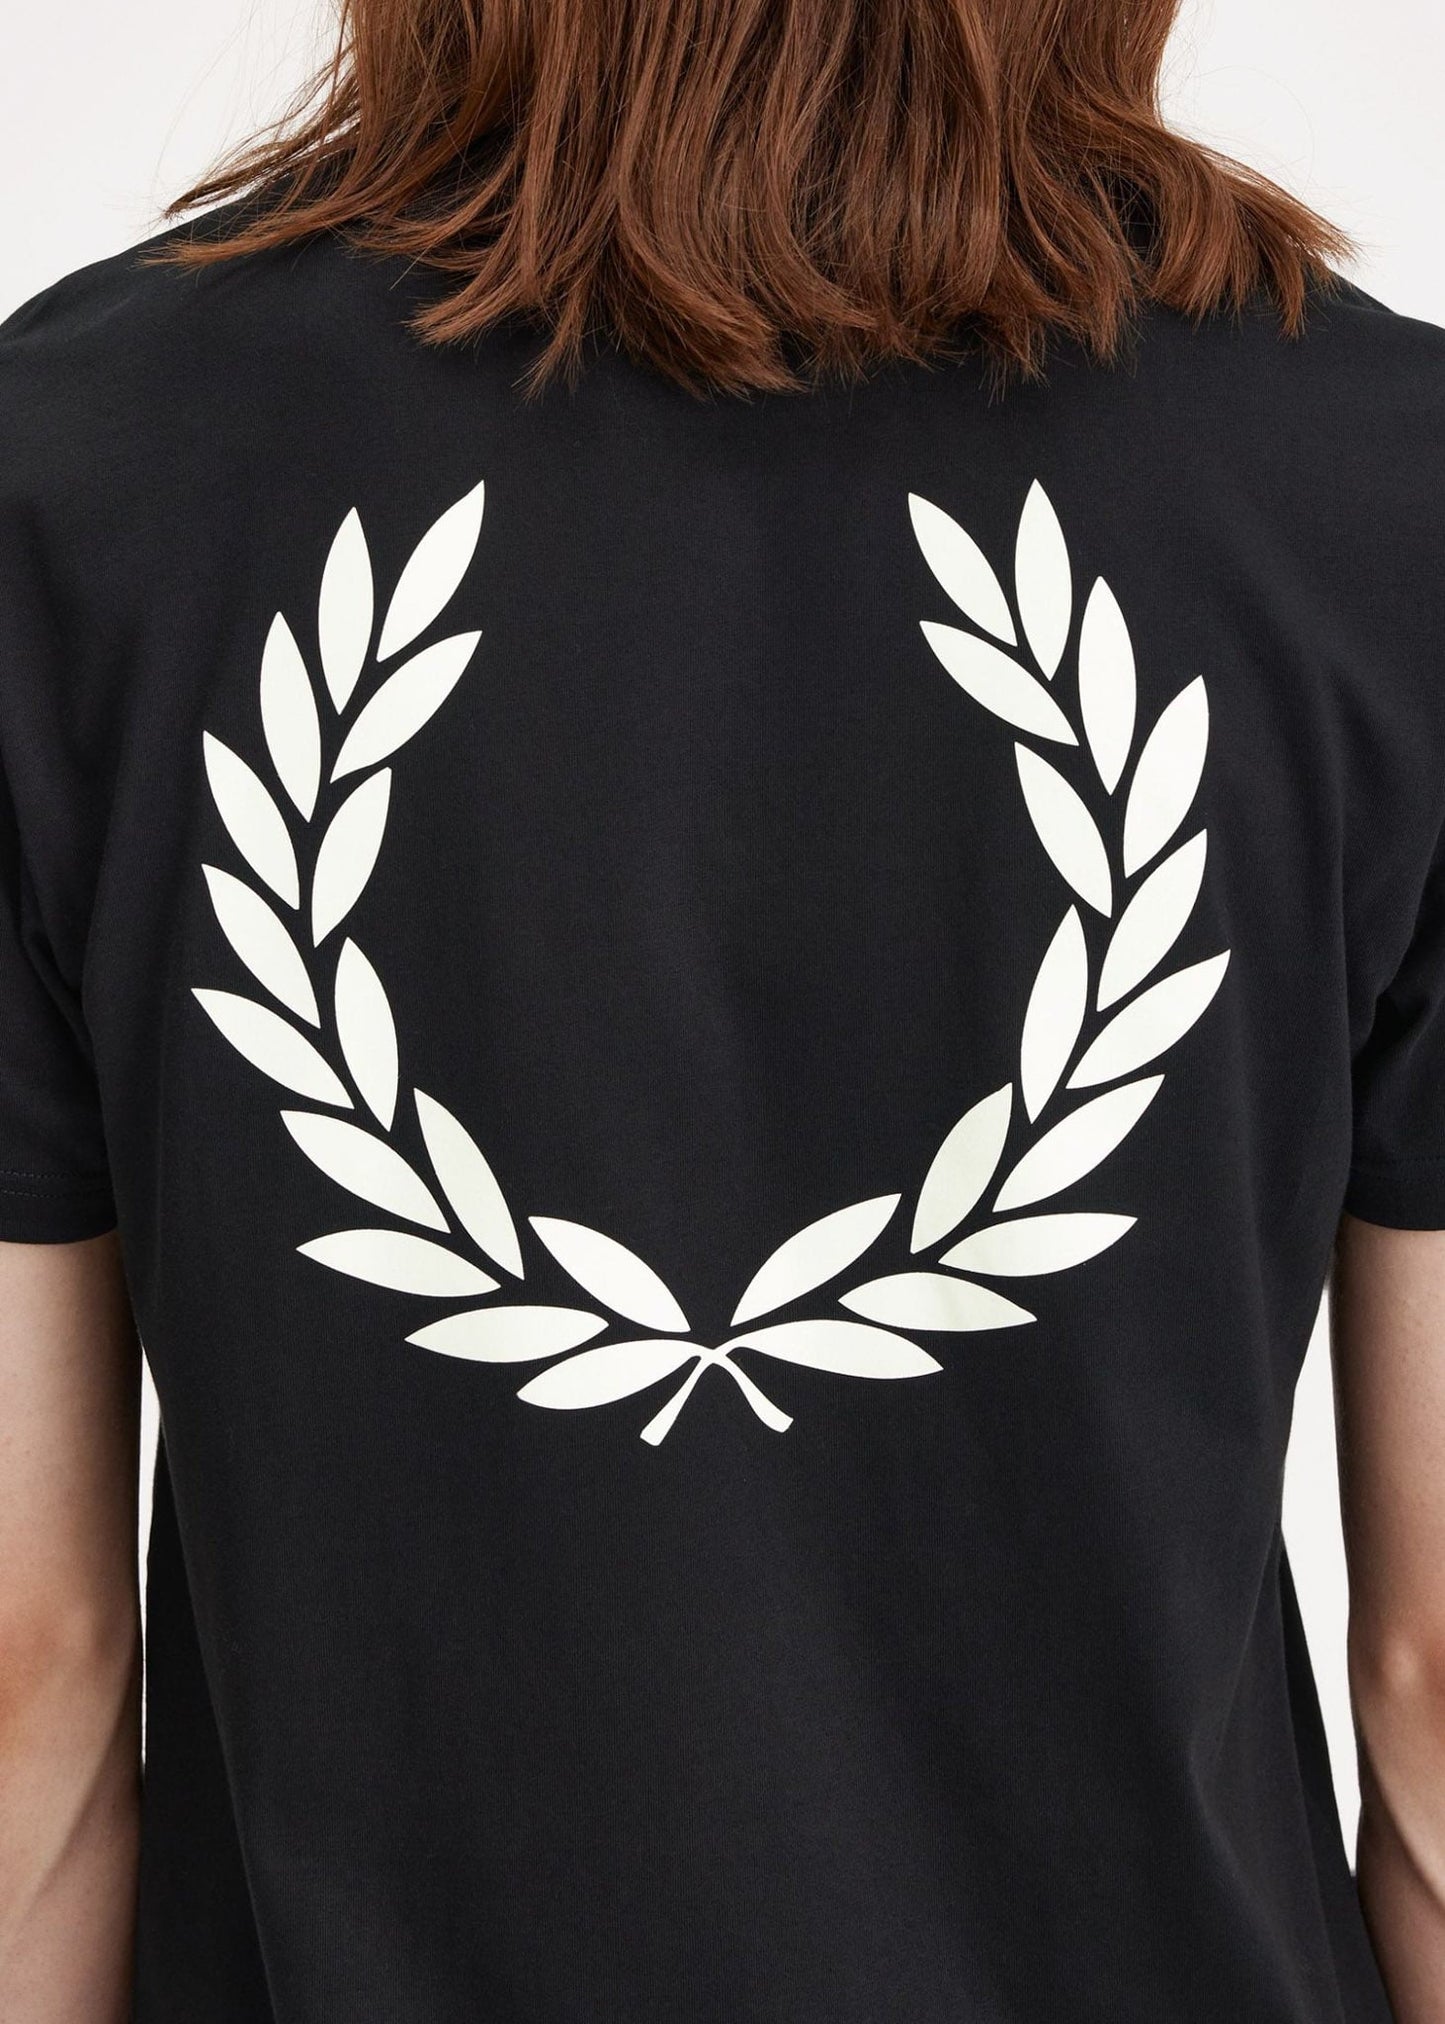 Fred Perry T-shirts  Rear powder laurel graphic tee - black 